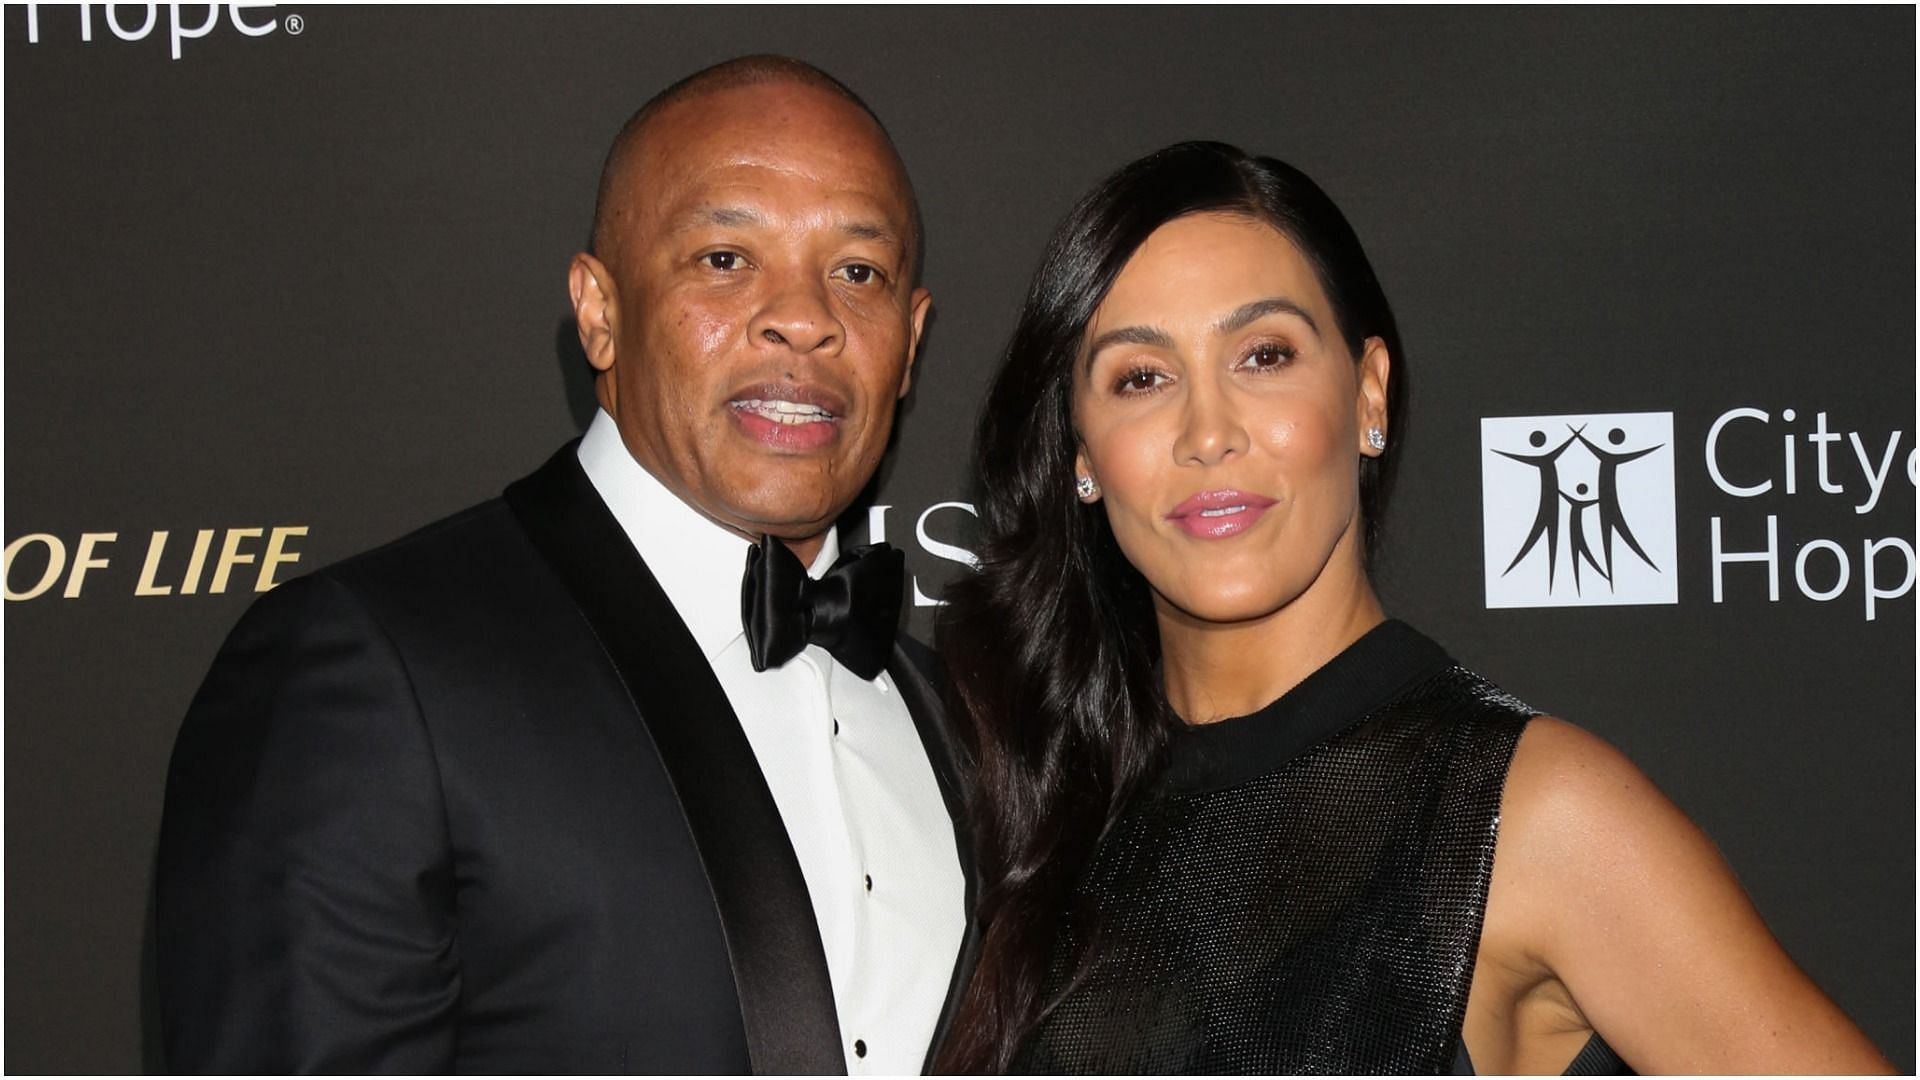 Dr. Dre and Nicole Young have reached a divorce settlement (Image via Getty Images/Paul Archuleta)